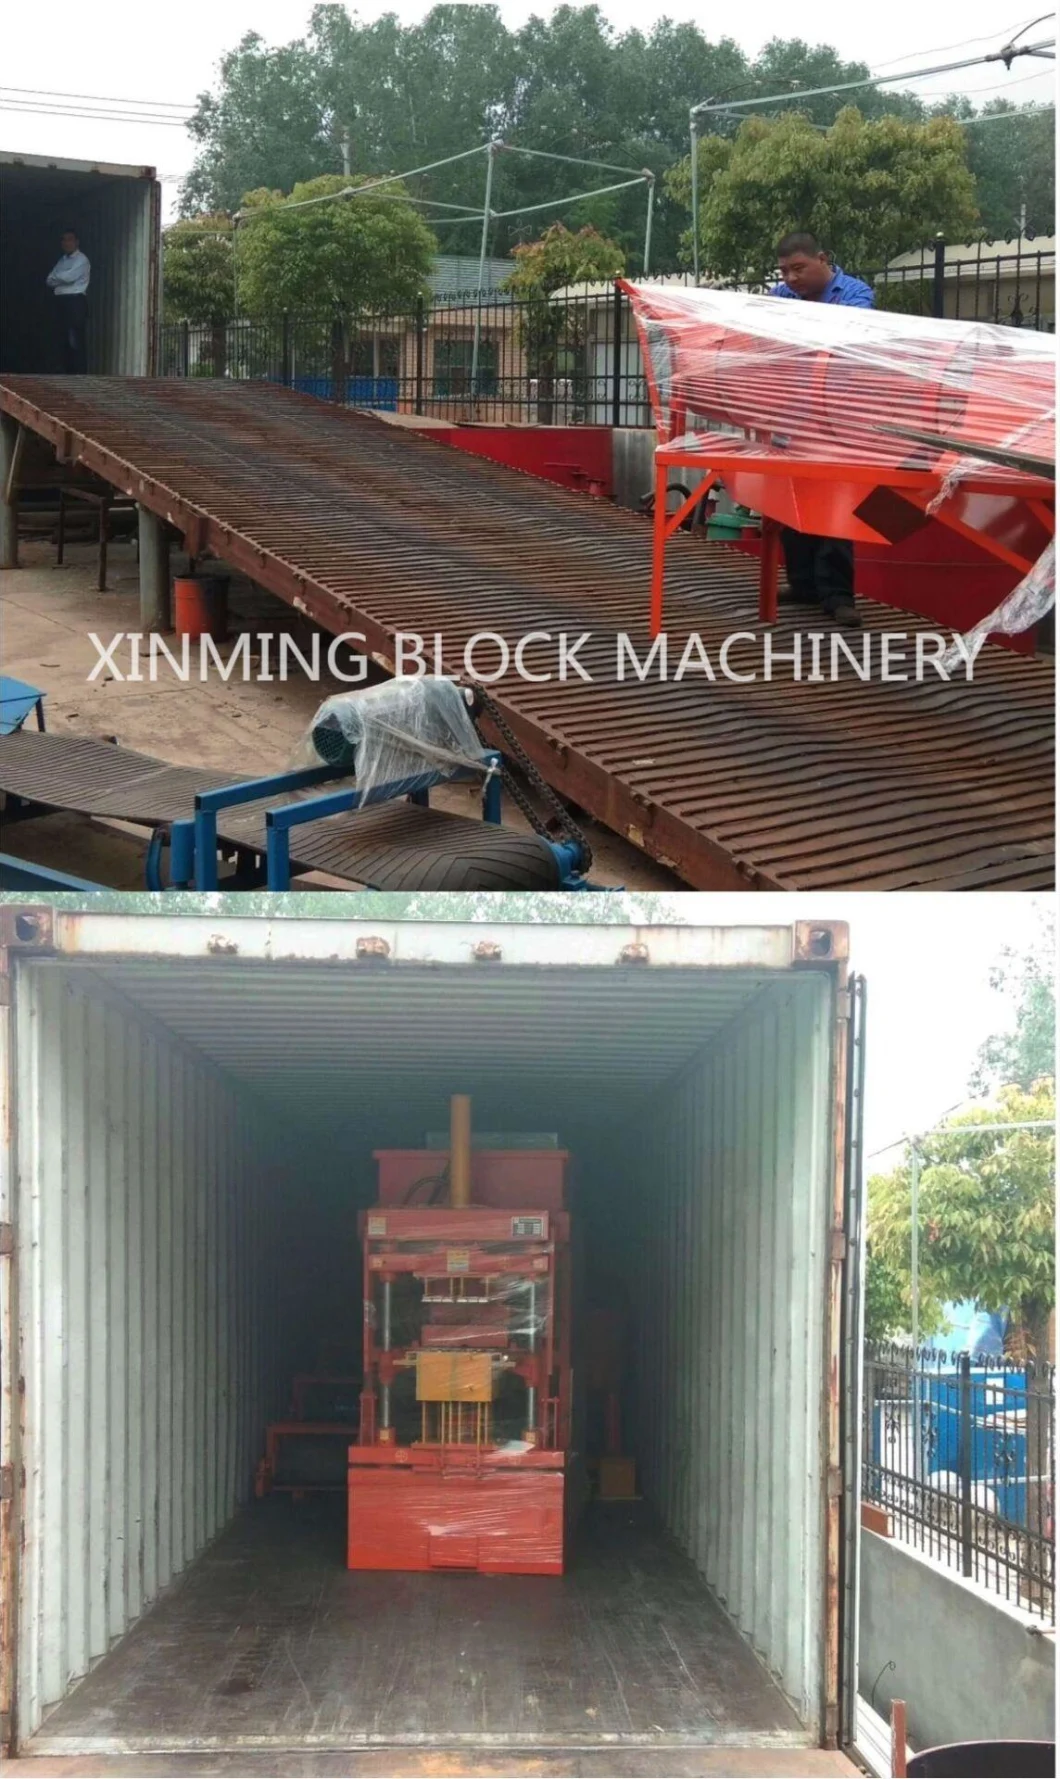 Xm 2-25 Semi Automatic Block Machine Commercial Use Block Making Machine Make Bricks, Stone by Clay, Soil or Any Other Materials